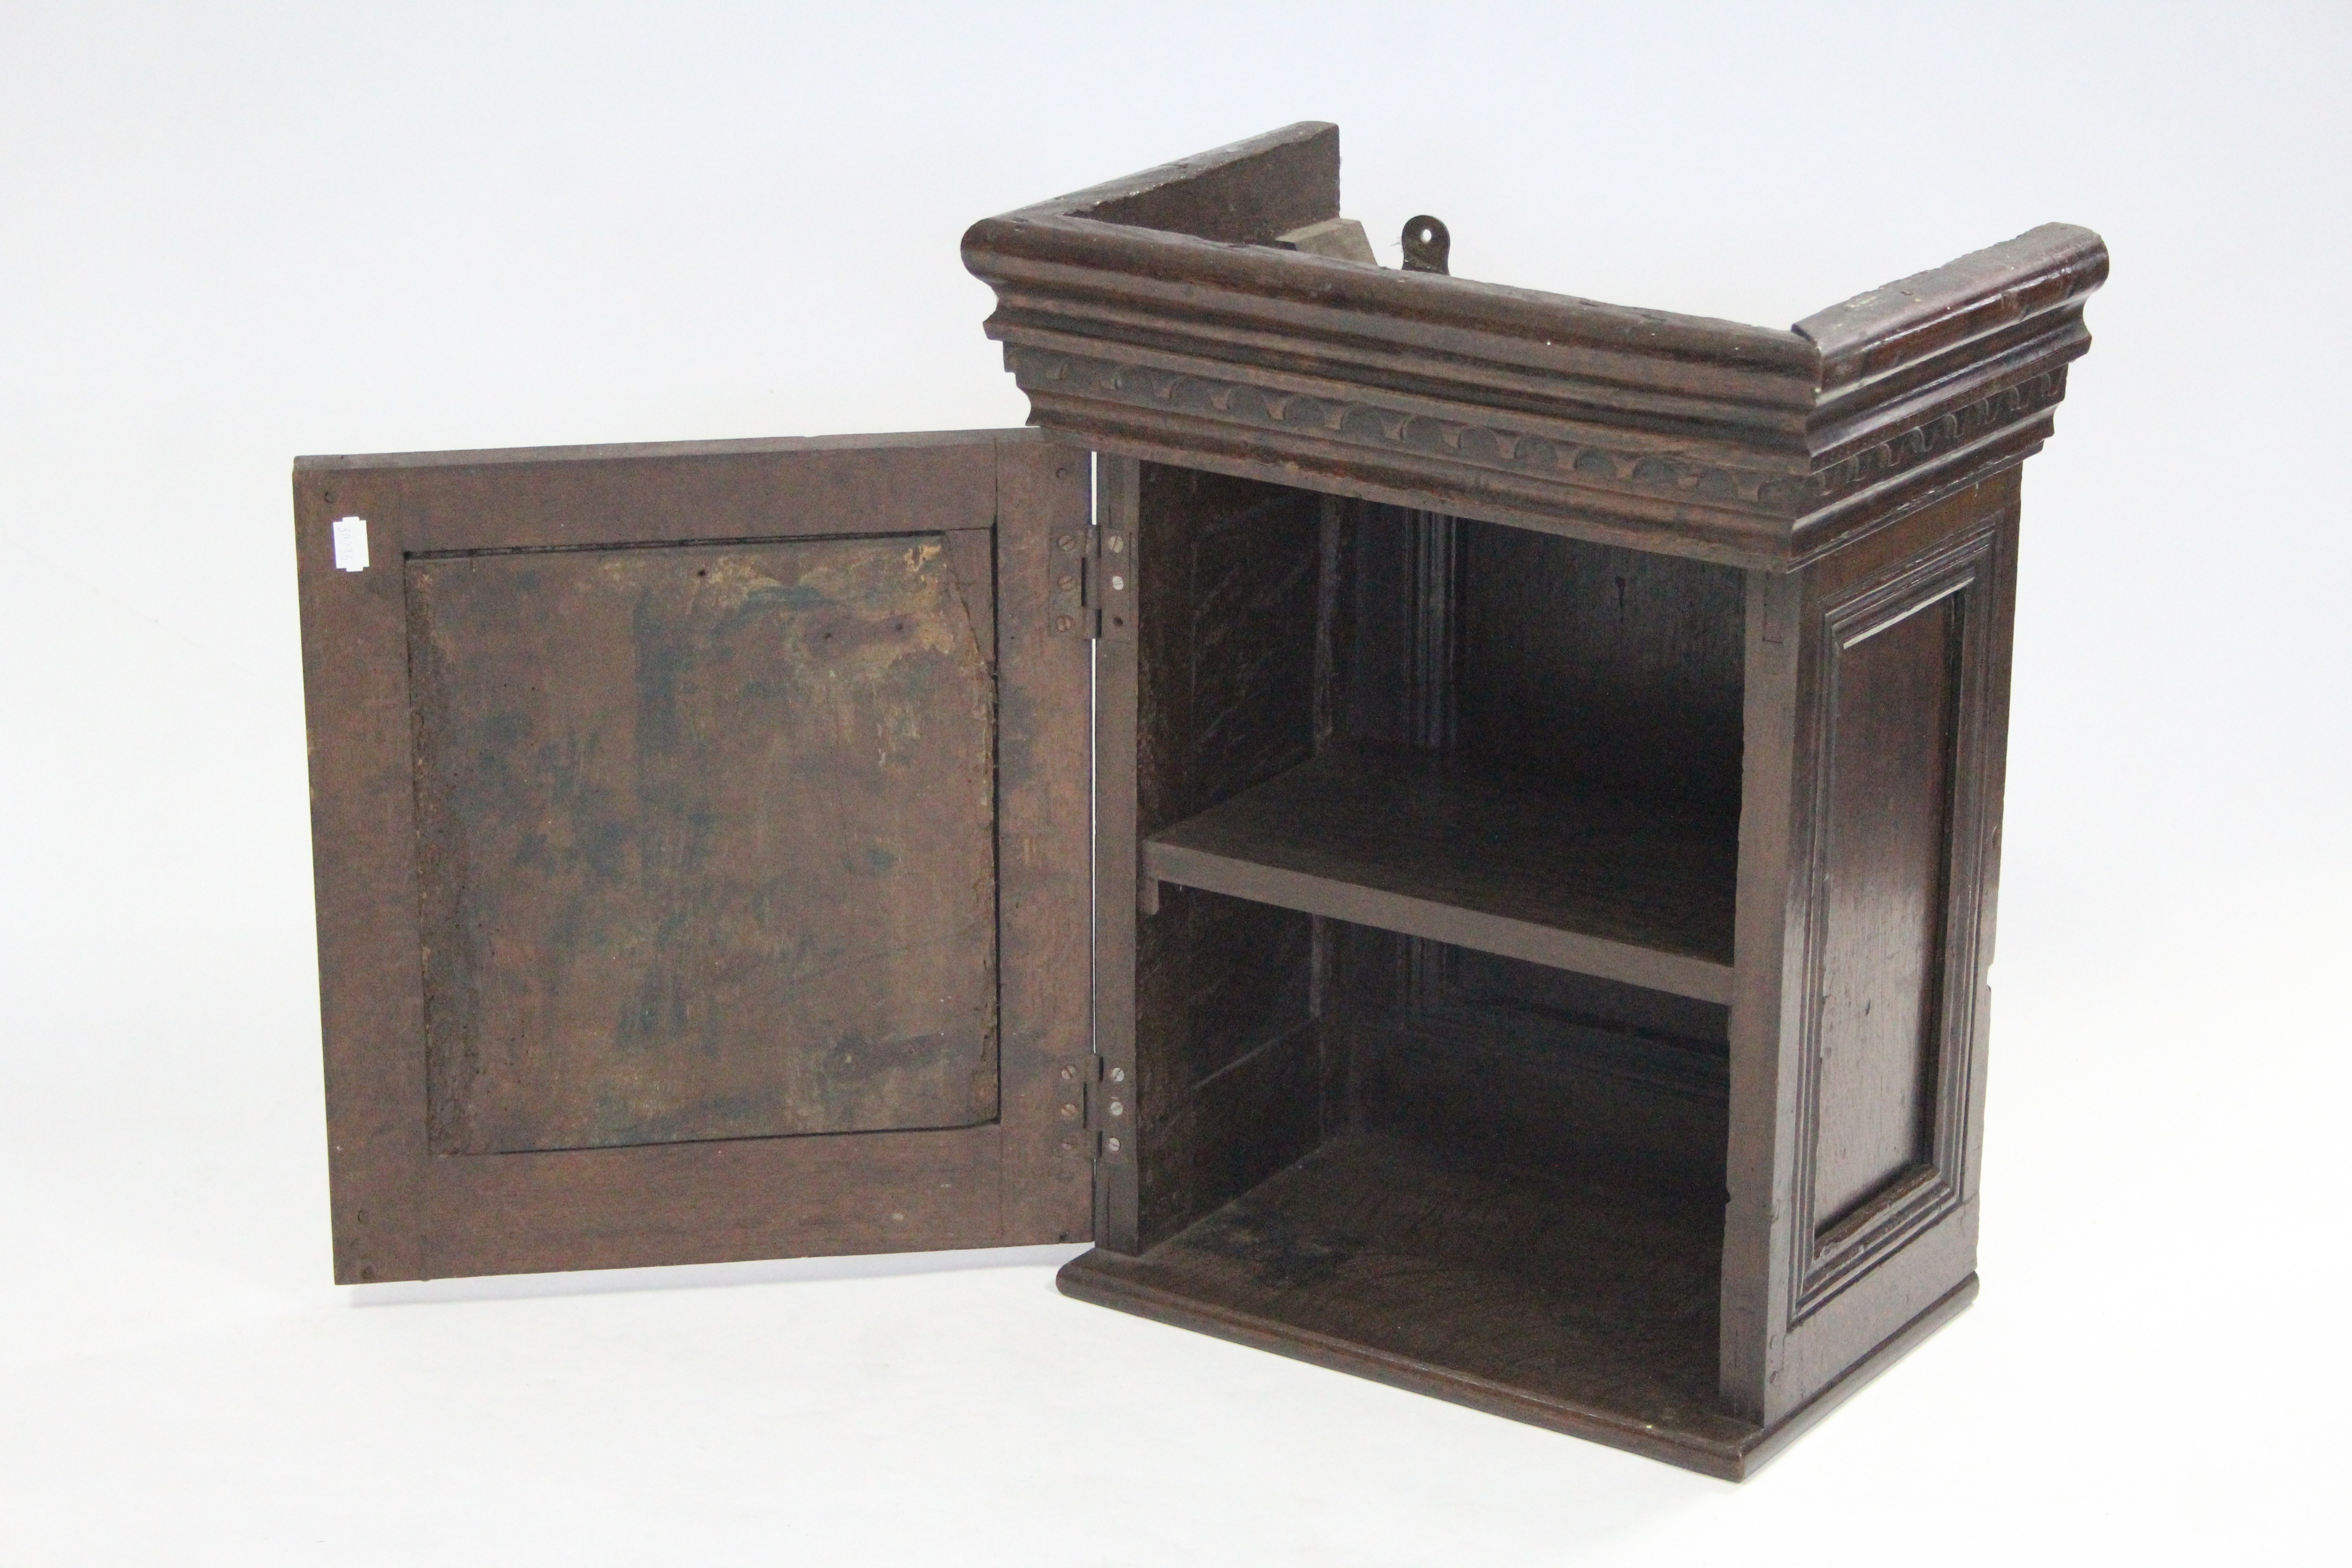 A 17th century style carved walnut & oak small cabinet enclosed by panel door with decoration of a - Image 3 of 3